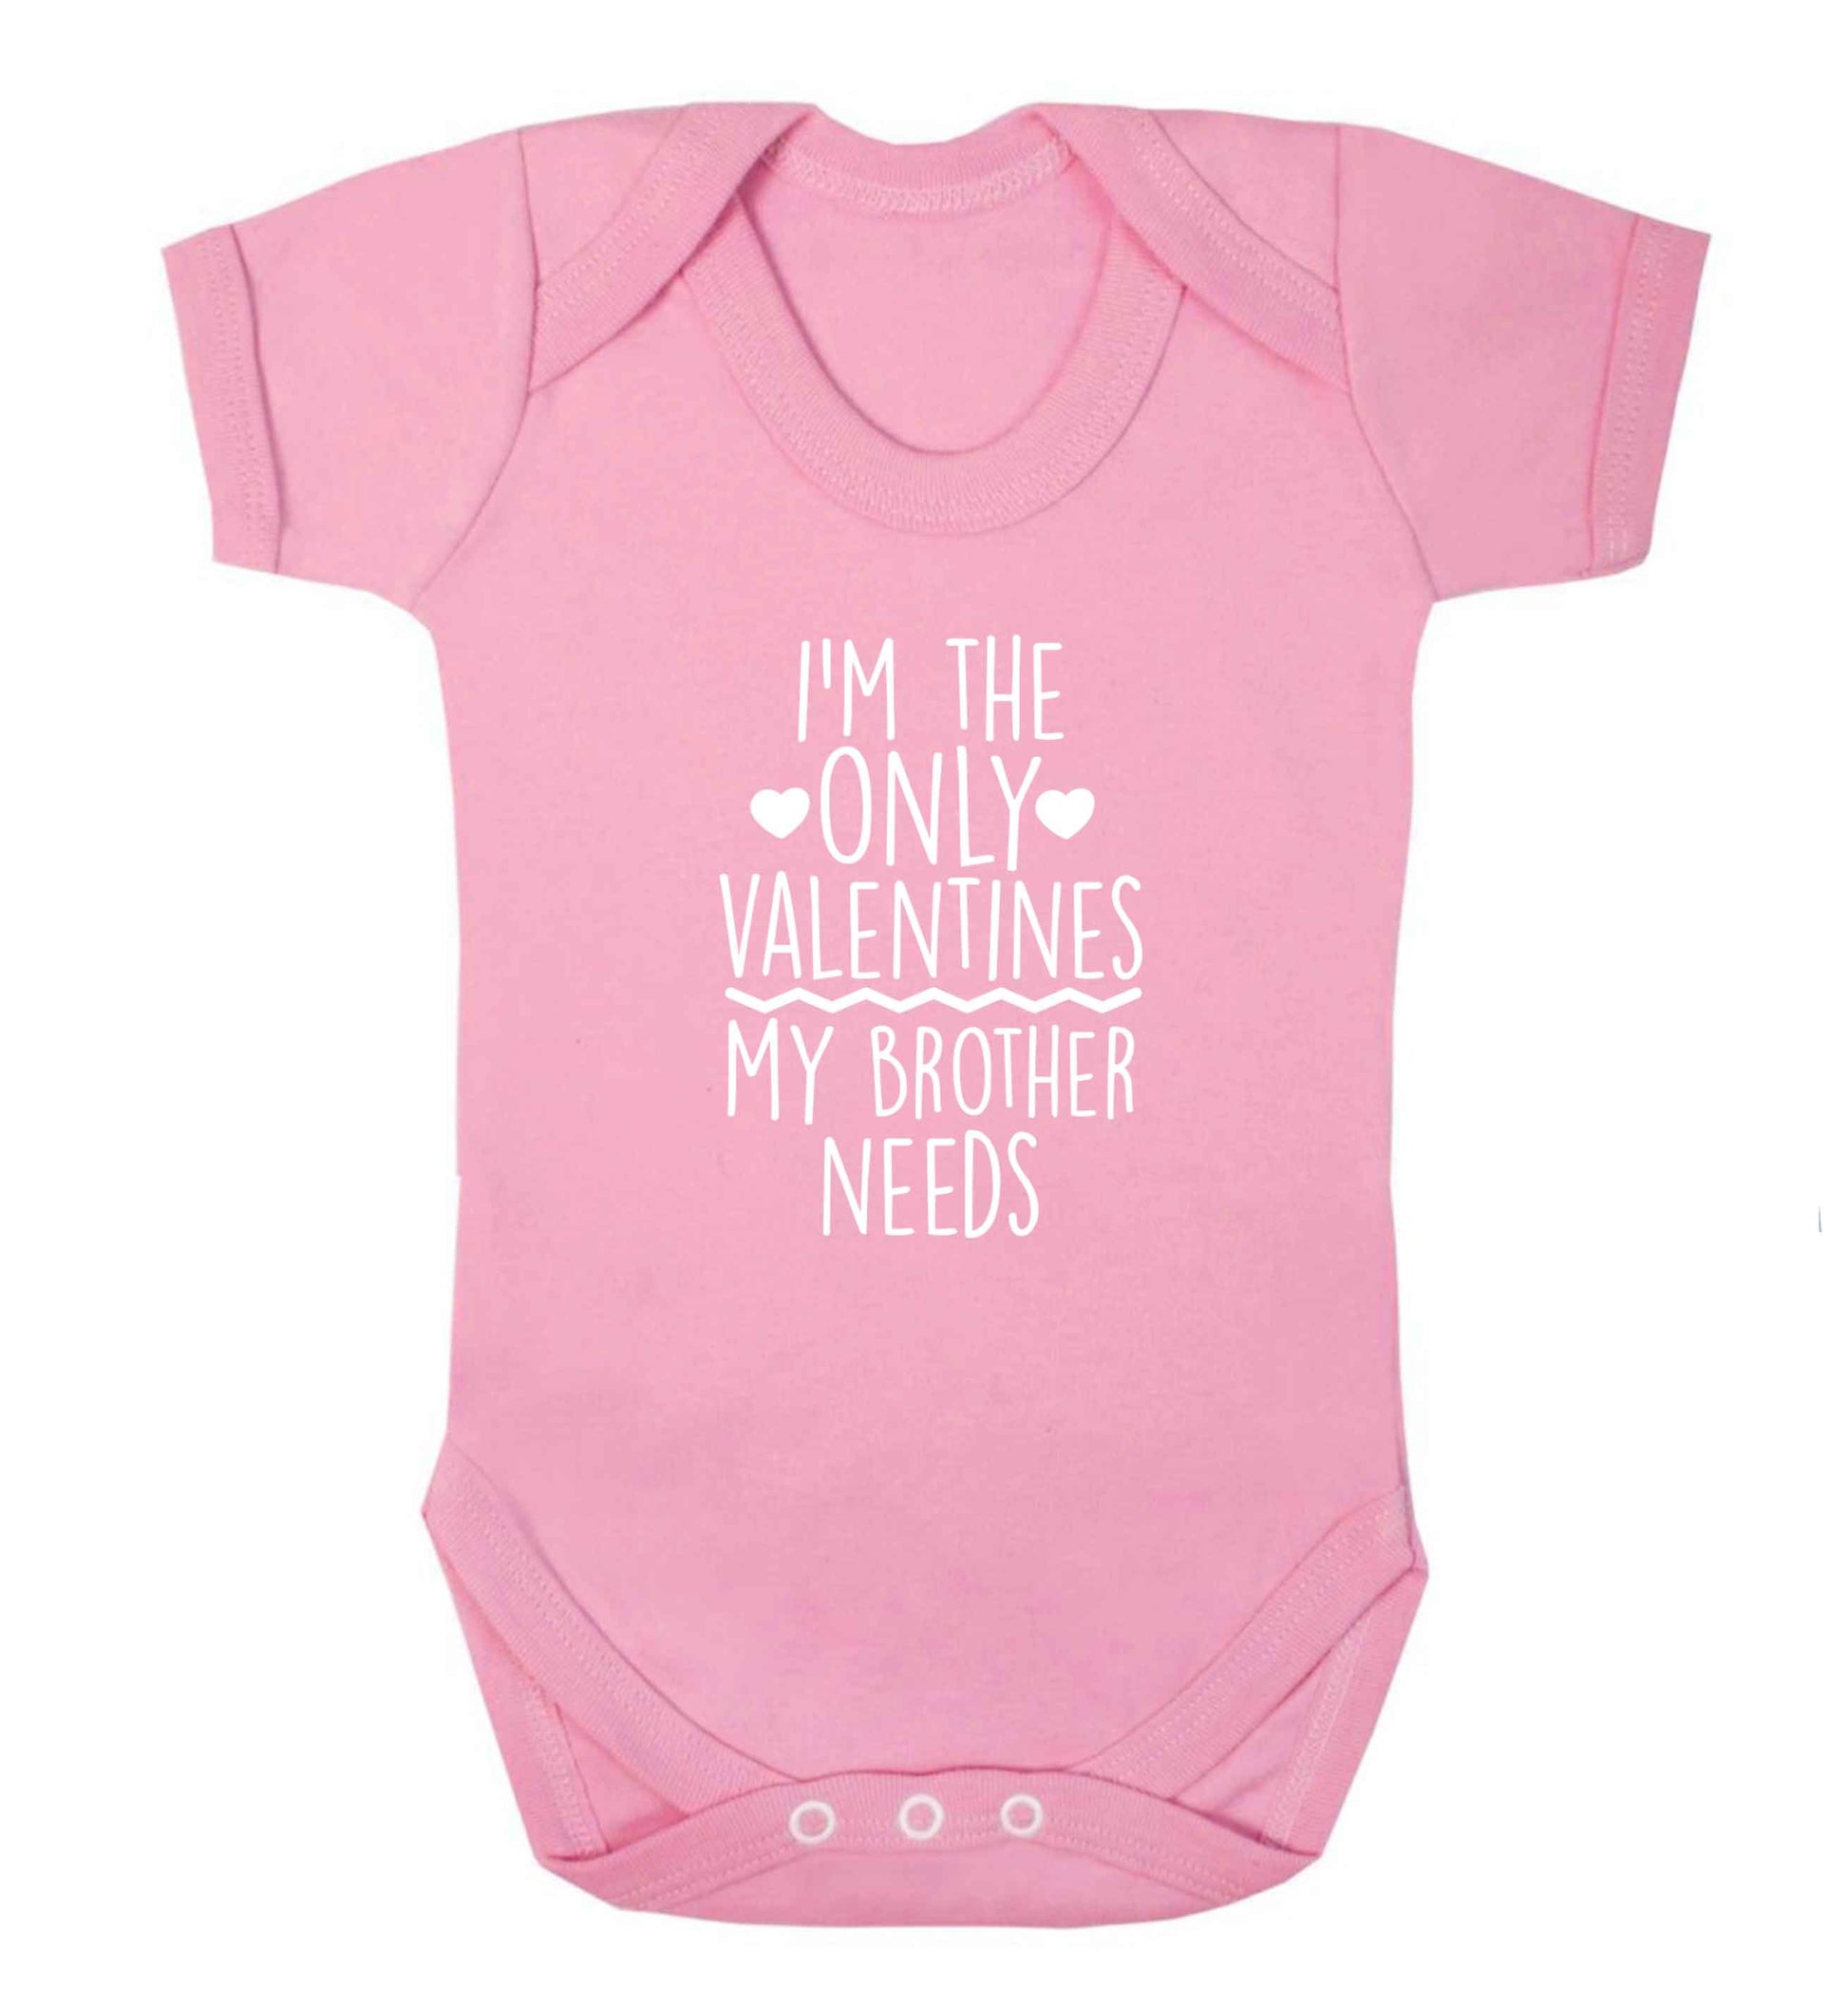 I'm the only valentines my brother needs baby vest pale pink 18-24 months